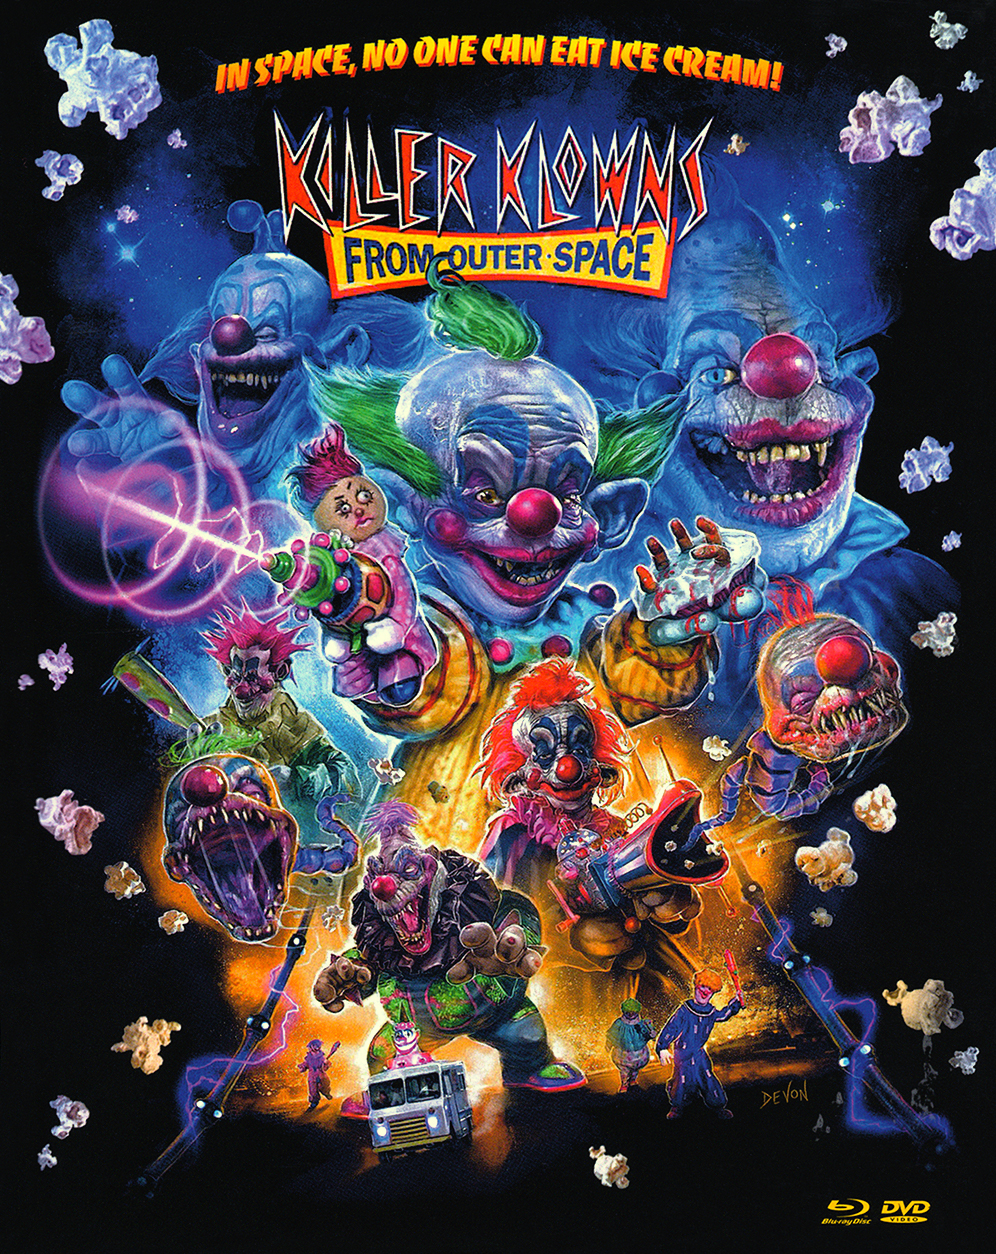 Killer from outer space. Killer Klowns from Outer Space 1988. Killer Klowns from Outer Space the game. Killer Klowns from Outer Space. Killer Klowns from Outer Space poster.